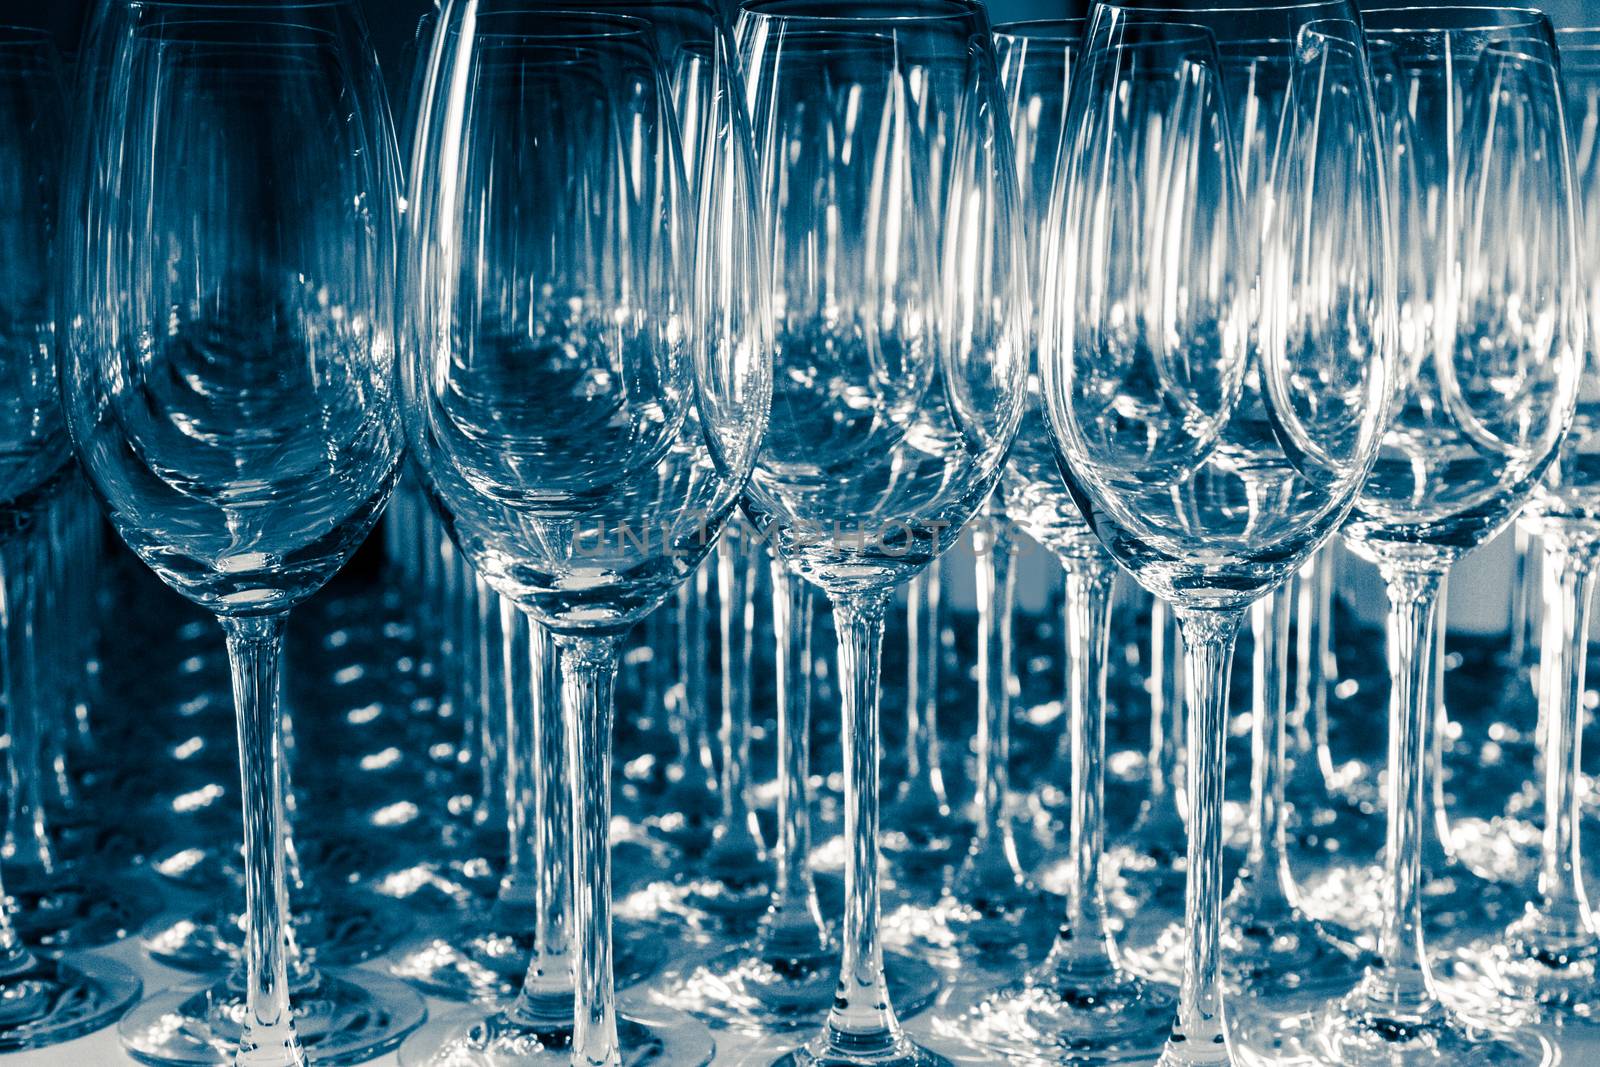 Many Empty Wineglasses Upside Down on a White reflective Table